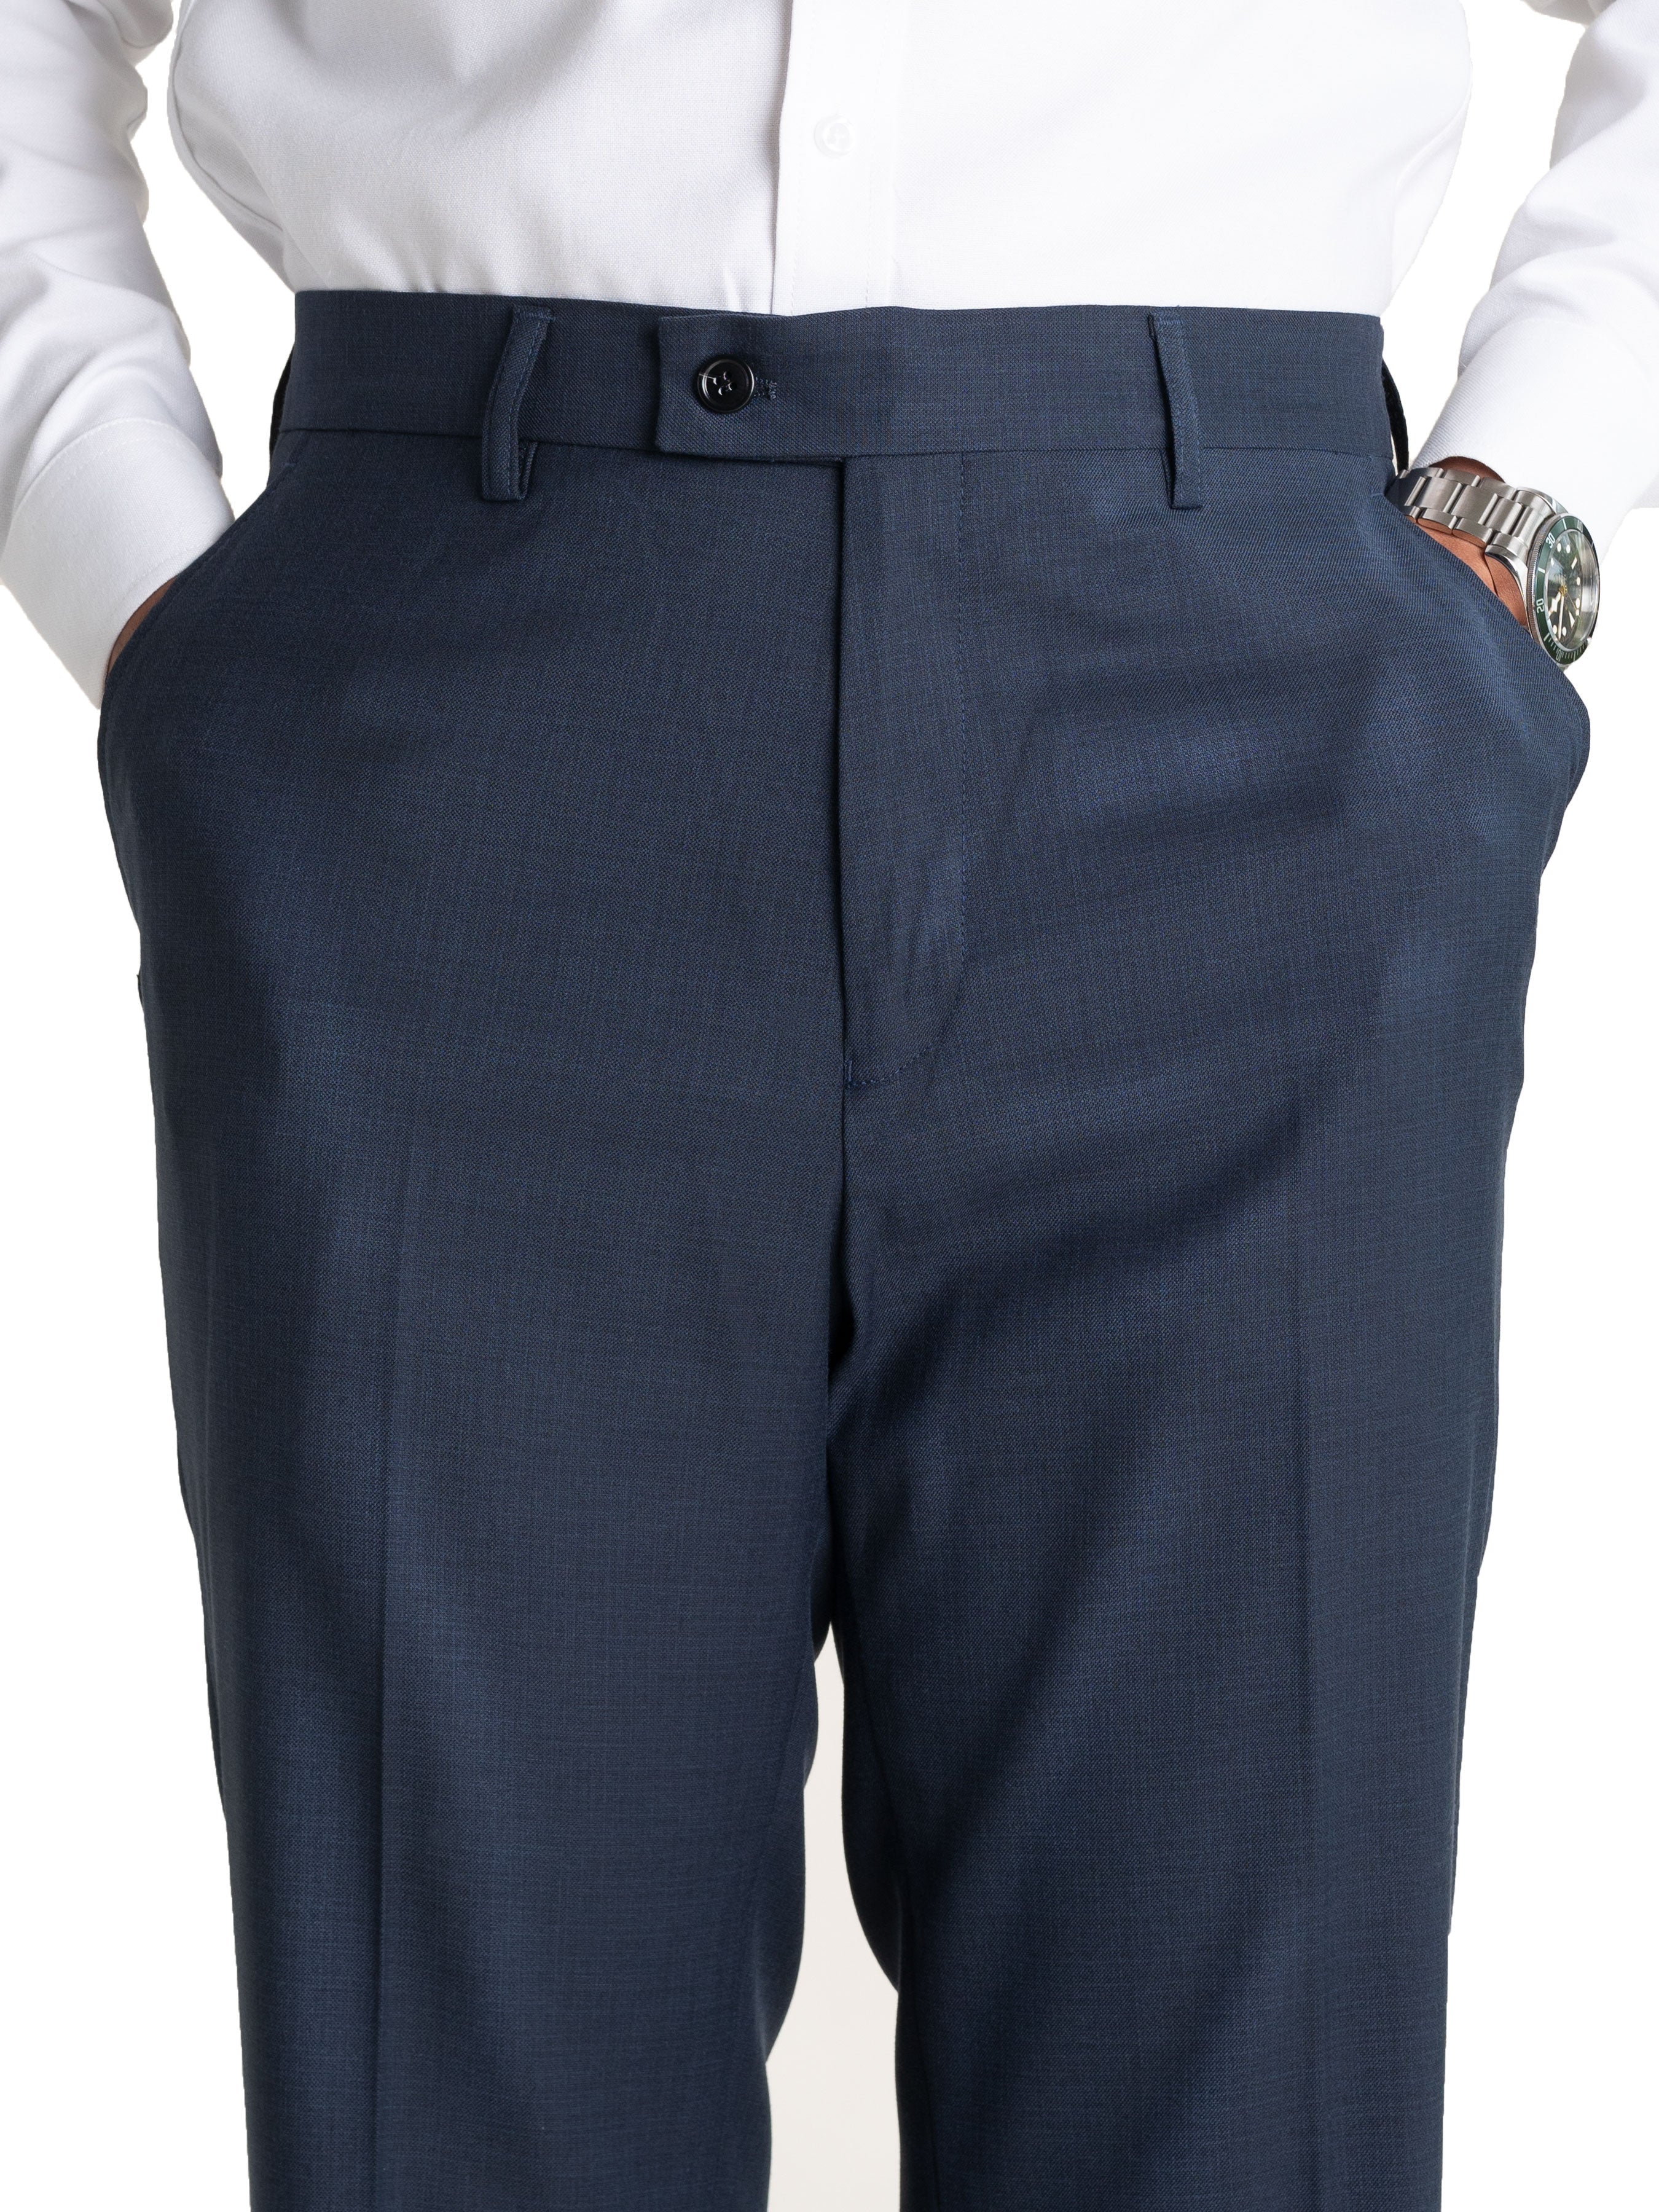 Trousers With Belt Loop - Yankees Blue (Stretchable) - Zeve Shoes